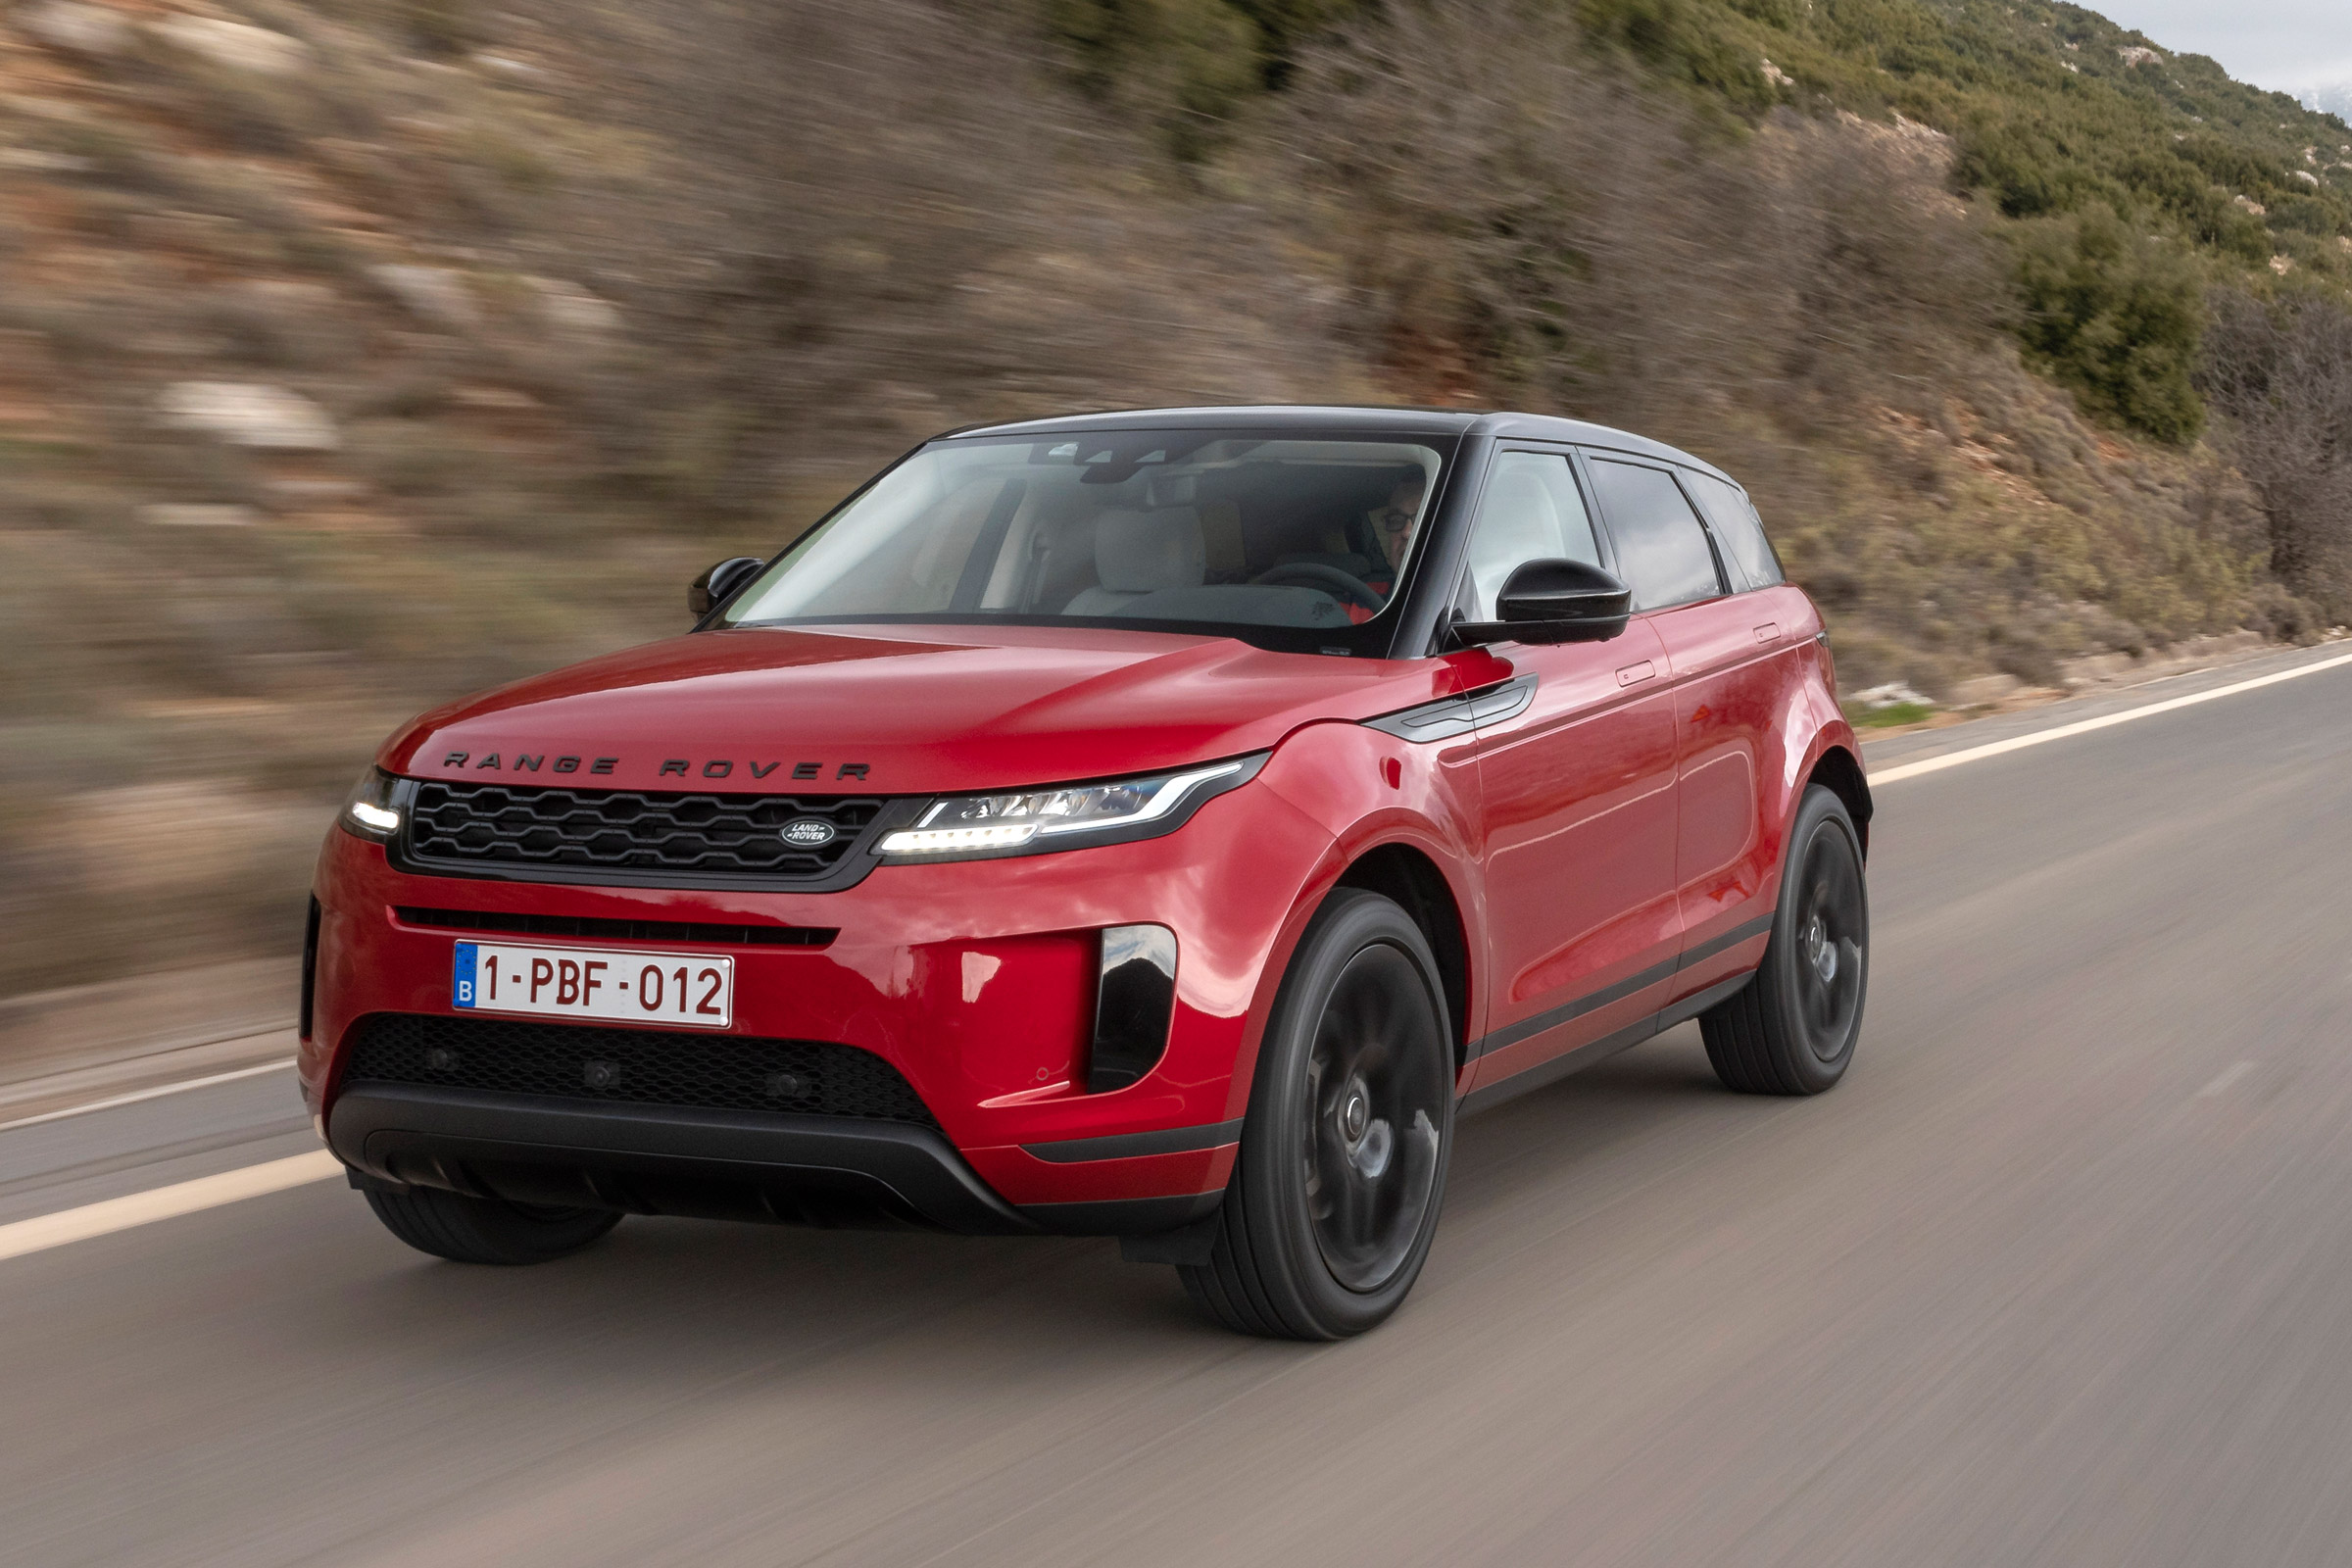 Range Rover Evoque Accessories 2019  : Tailor Range Rover Evoque To Your Specific Needs With A Range Of Stylish, Practical Accessories That Are Tough, Versatile And Bring.